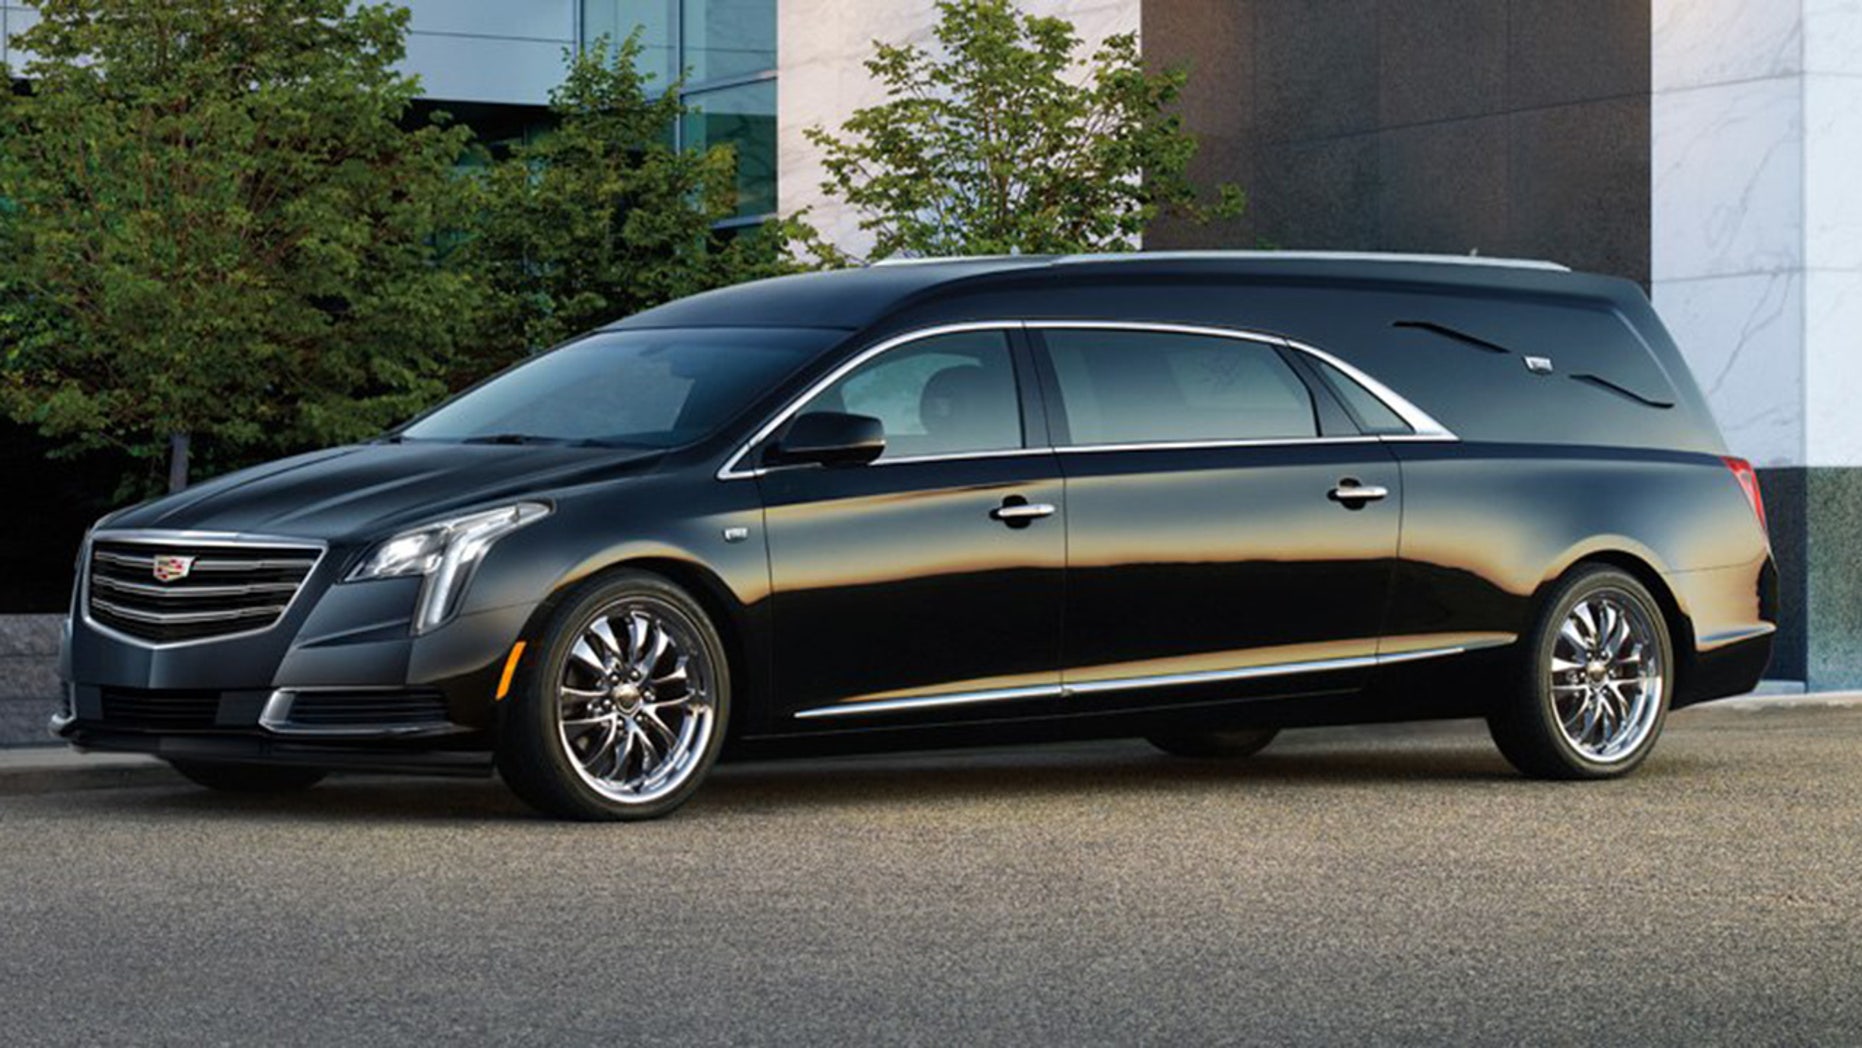 GM Fleet offers a version of the Cadillac XTS ready to be converted into a hearse.